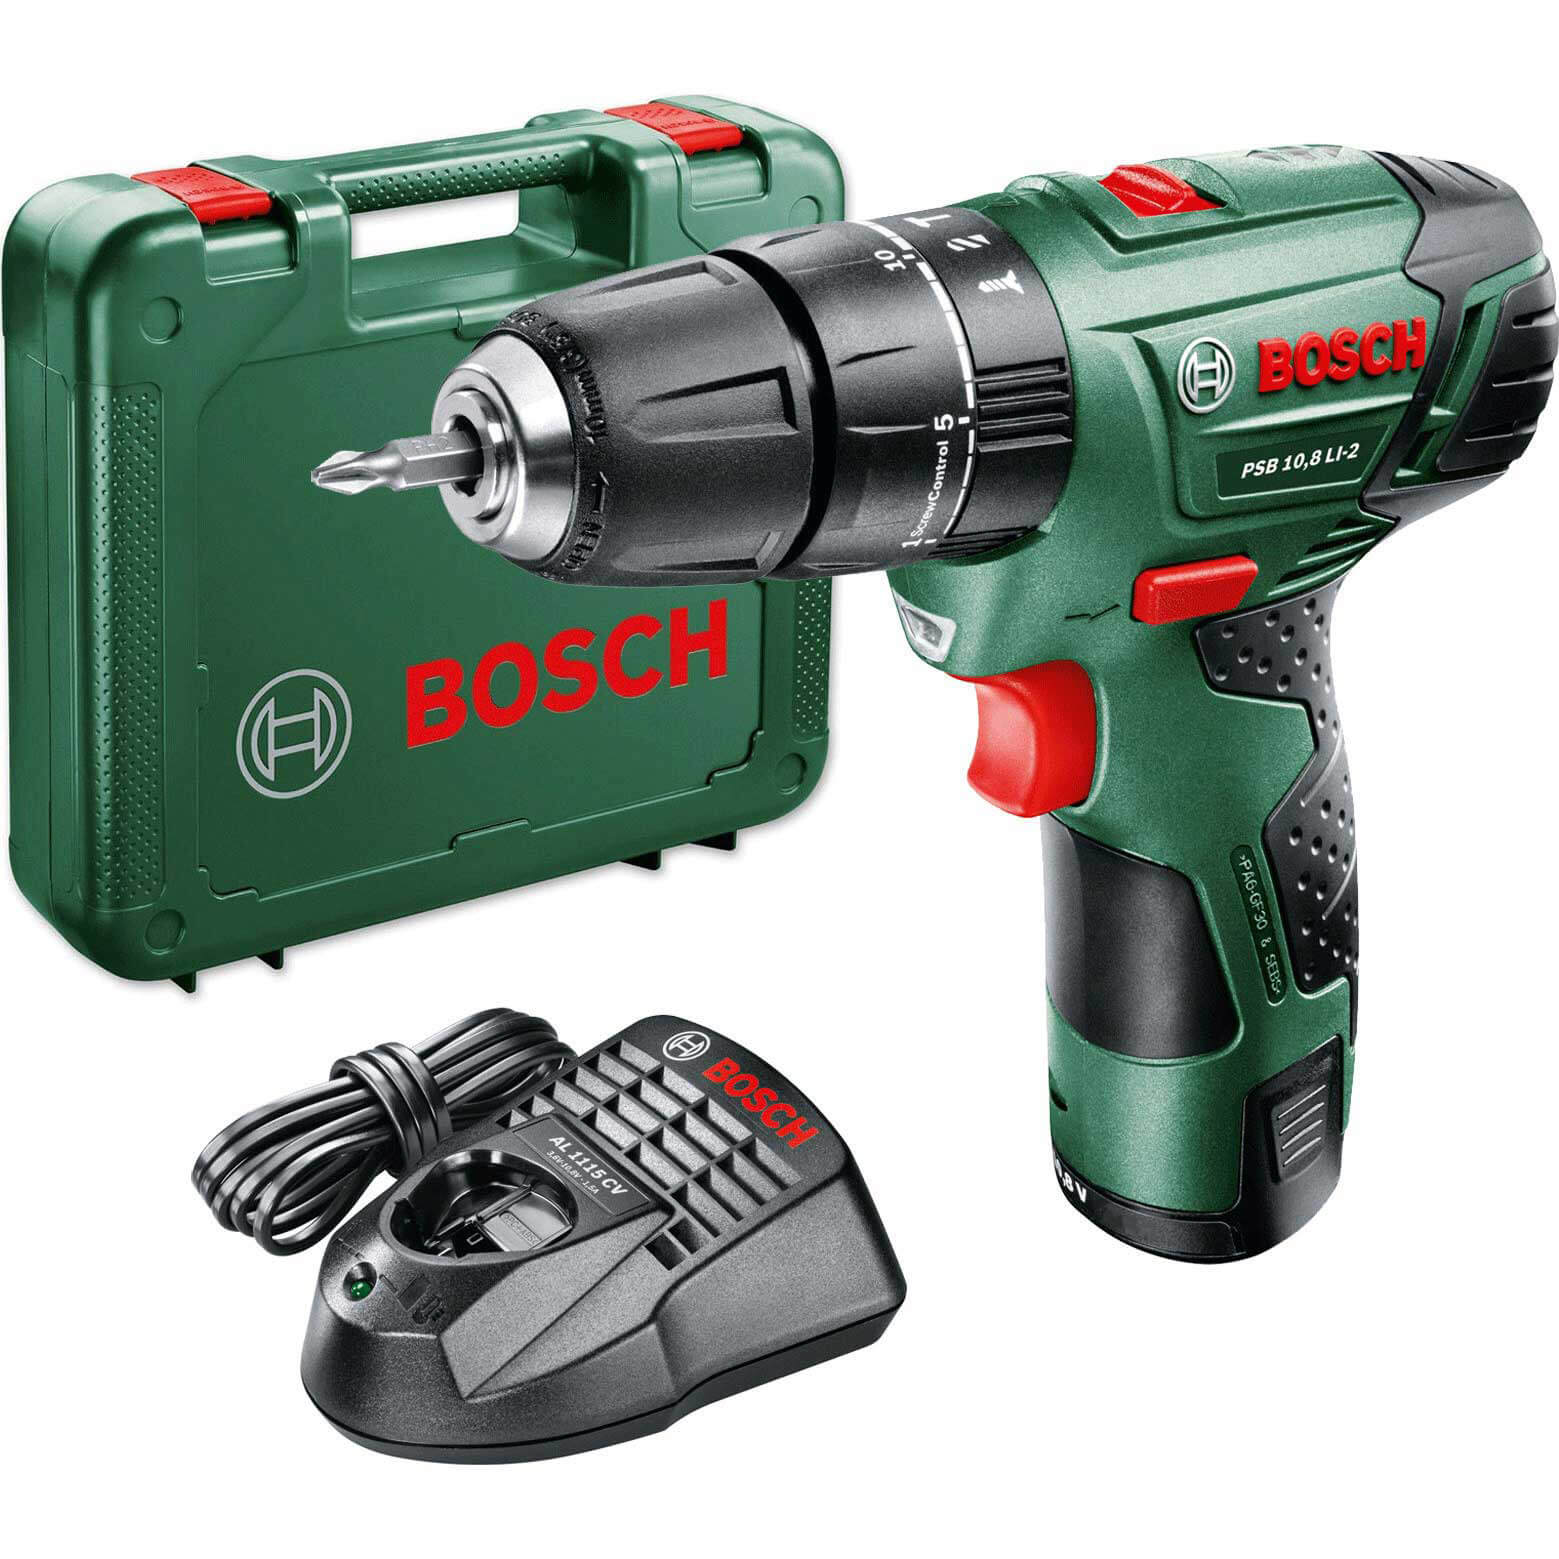 Bosch POWER4ALL PSB 10.8 LI-2 10.8v Cordless 2 Speed Combi Drill with 1 Lithium Ion Battery 1.5ah